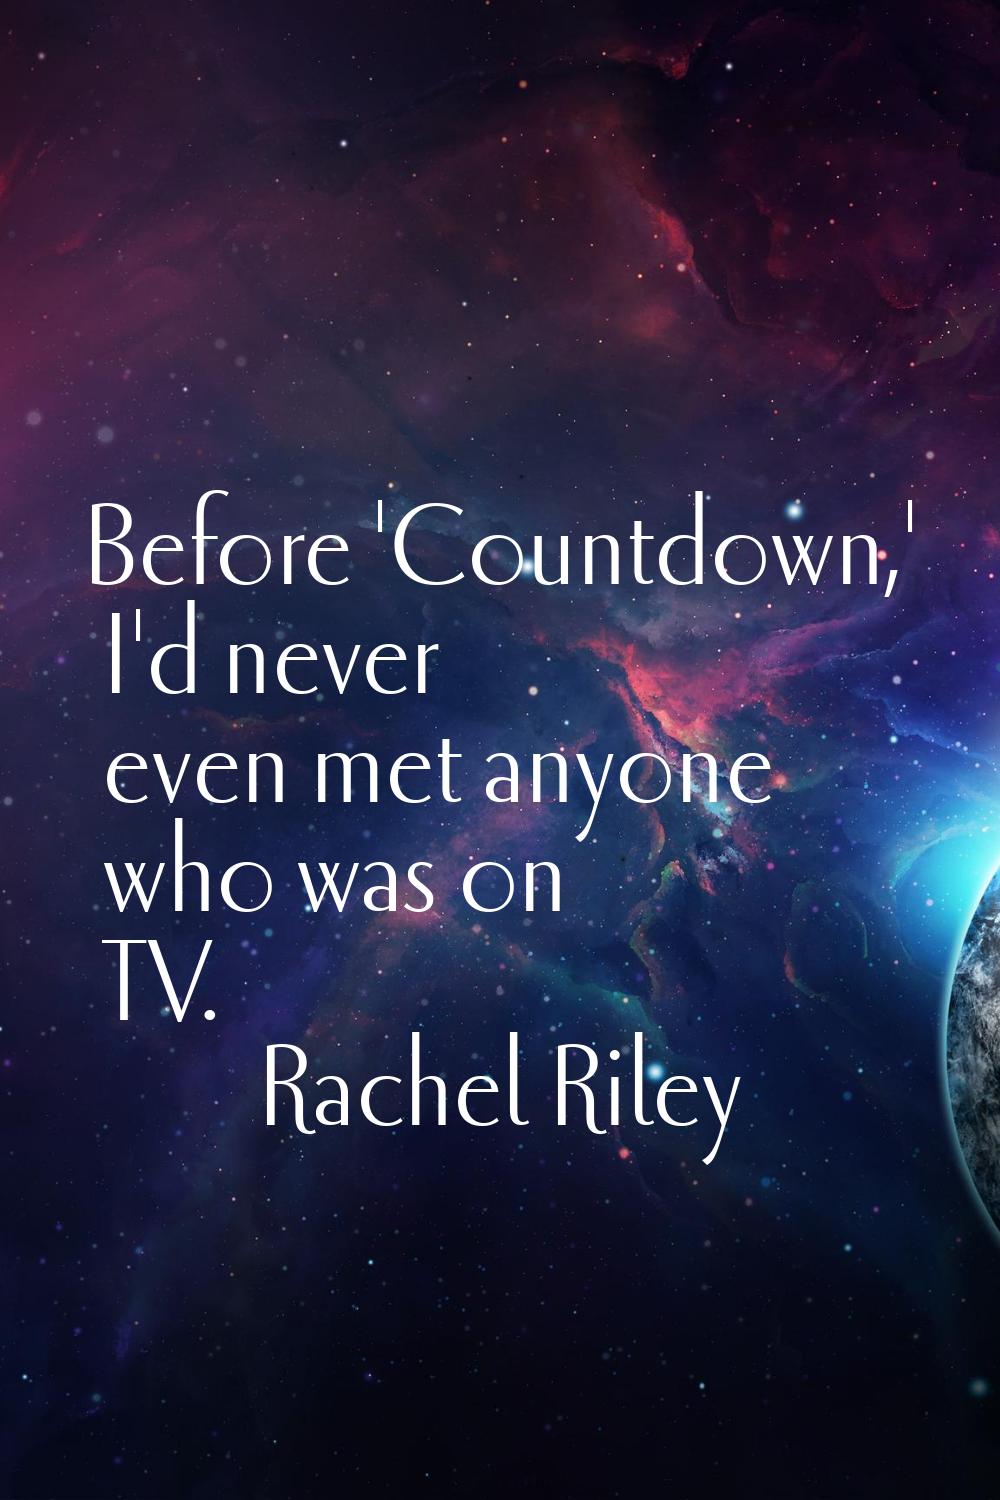 Before 'Countdown,' I'd never even met anyone who was on TV.